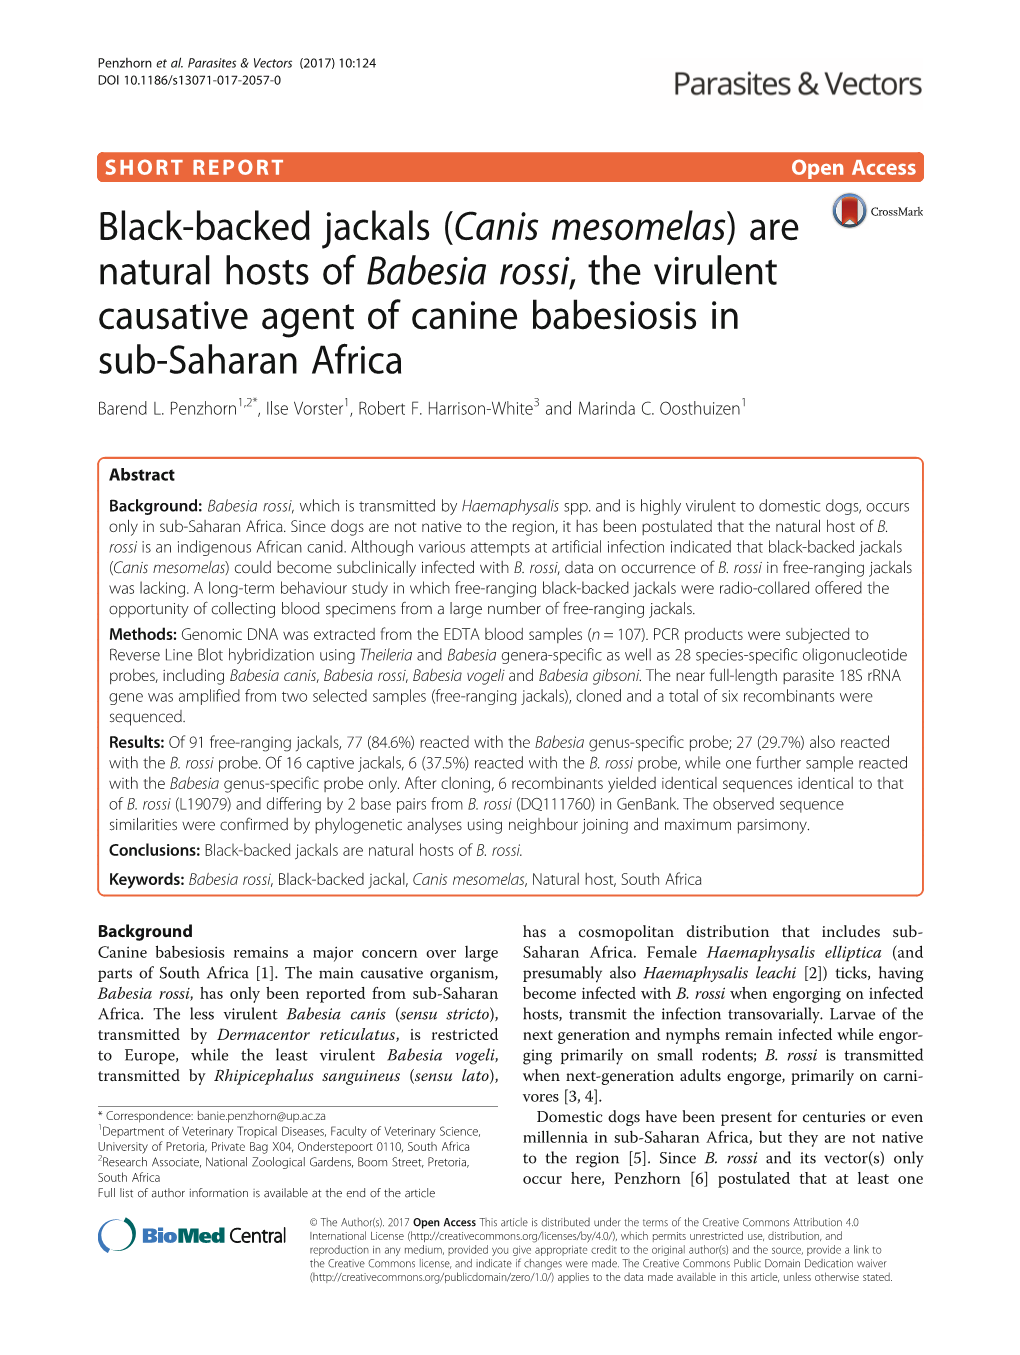 Black-Backed Jackals (Canis Mesomelas) Are Natural Hosts of Babesia Rossi, the Virulent Causative Agent of Canine Babesiosis in Sub-Saharan Africa Barend L